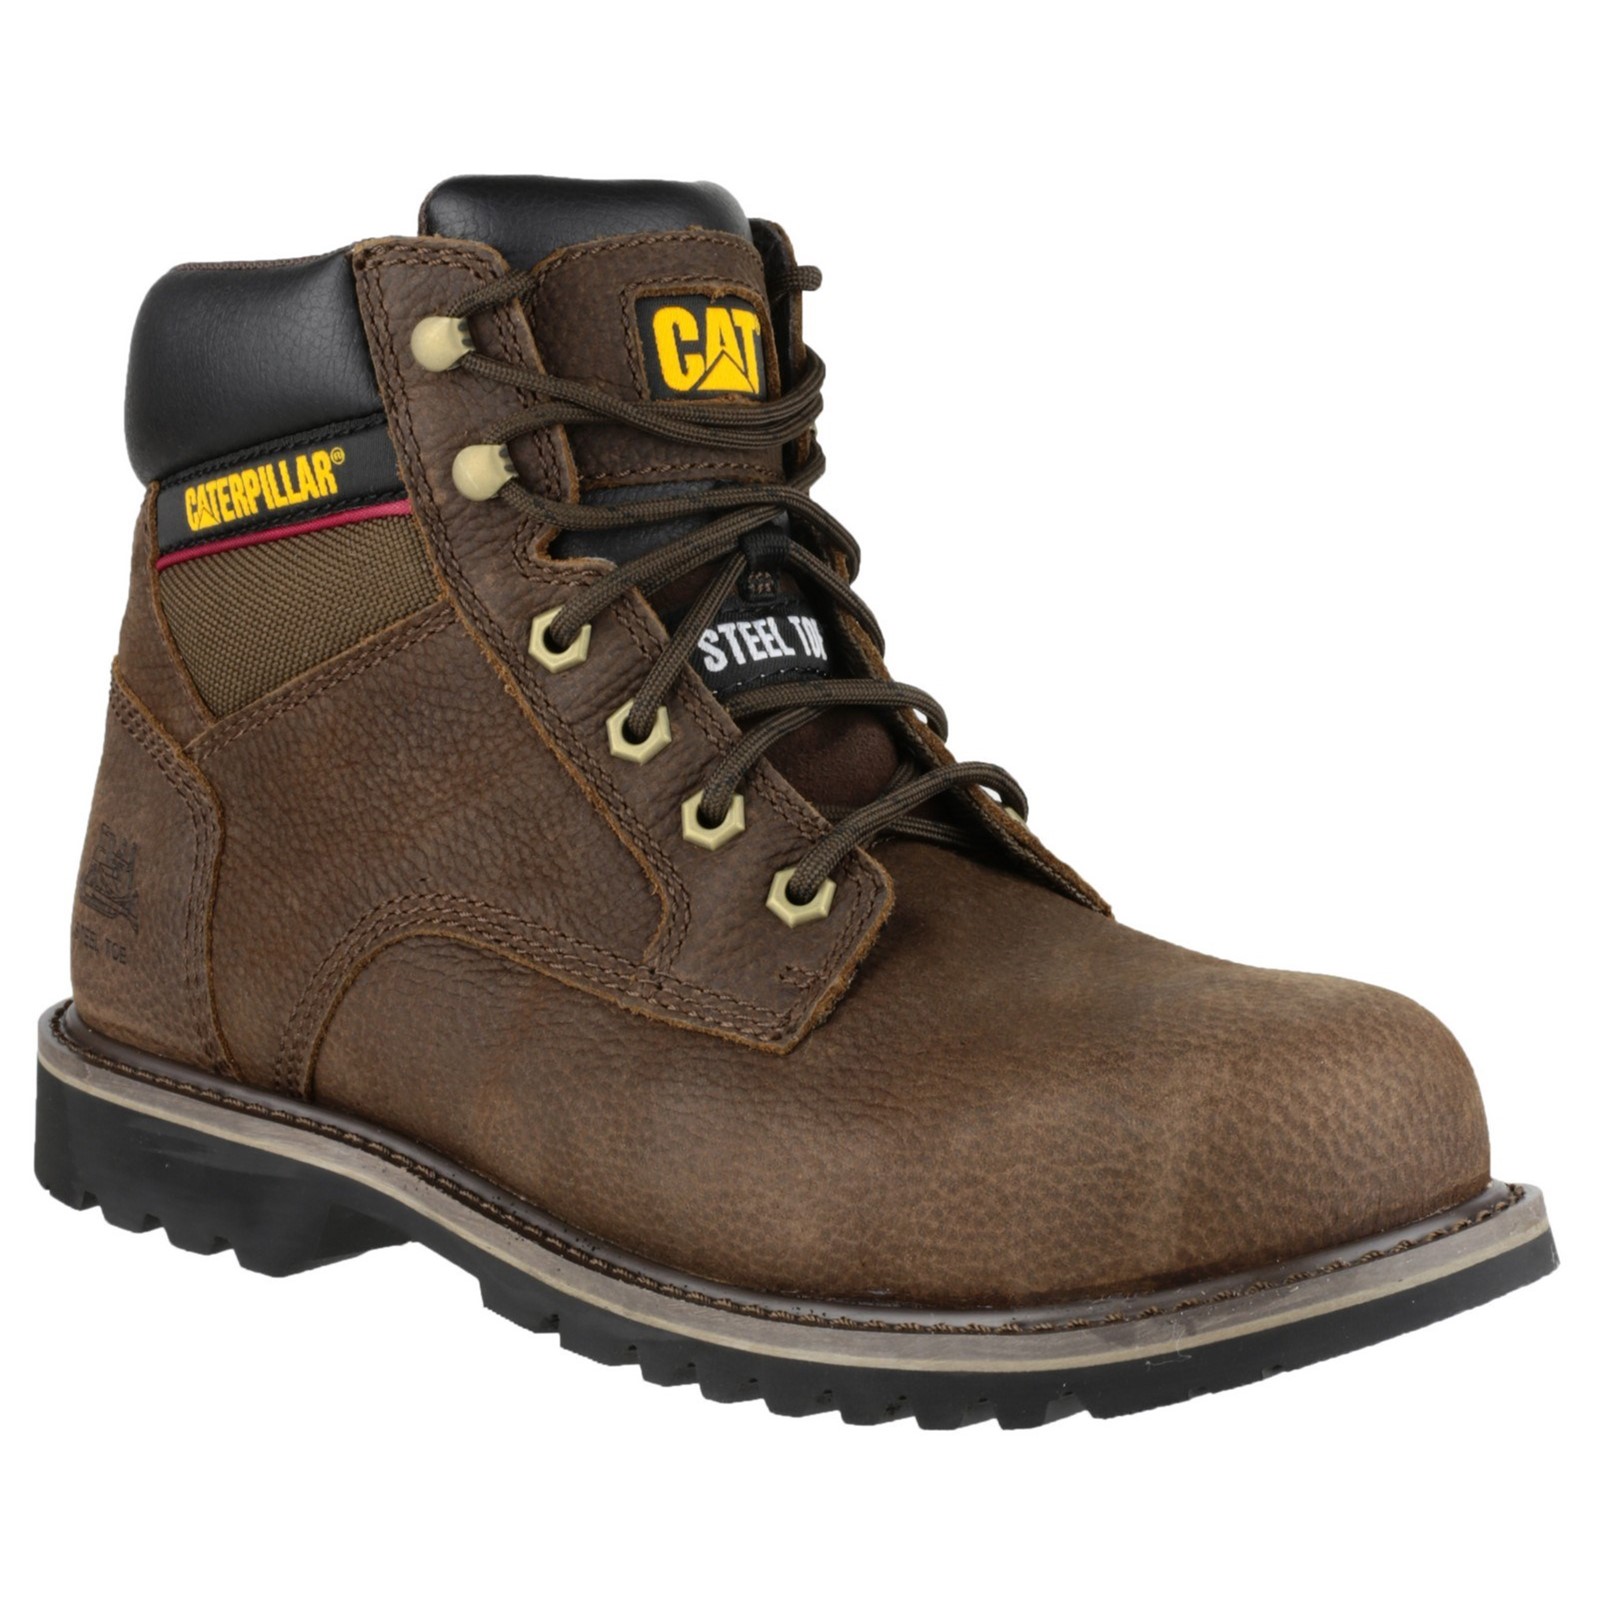 Electric Hi Safety Boot